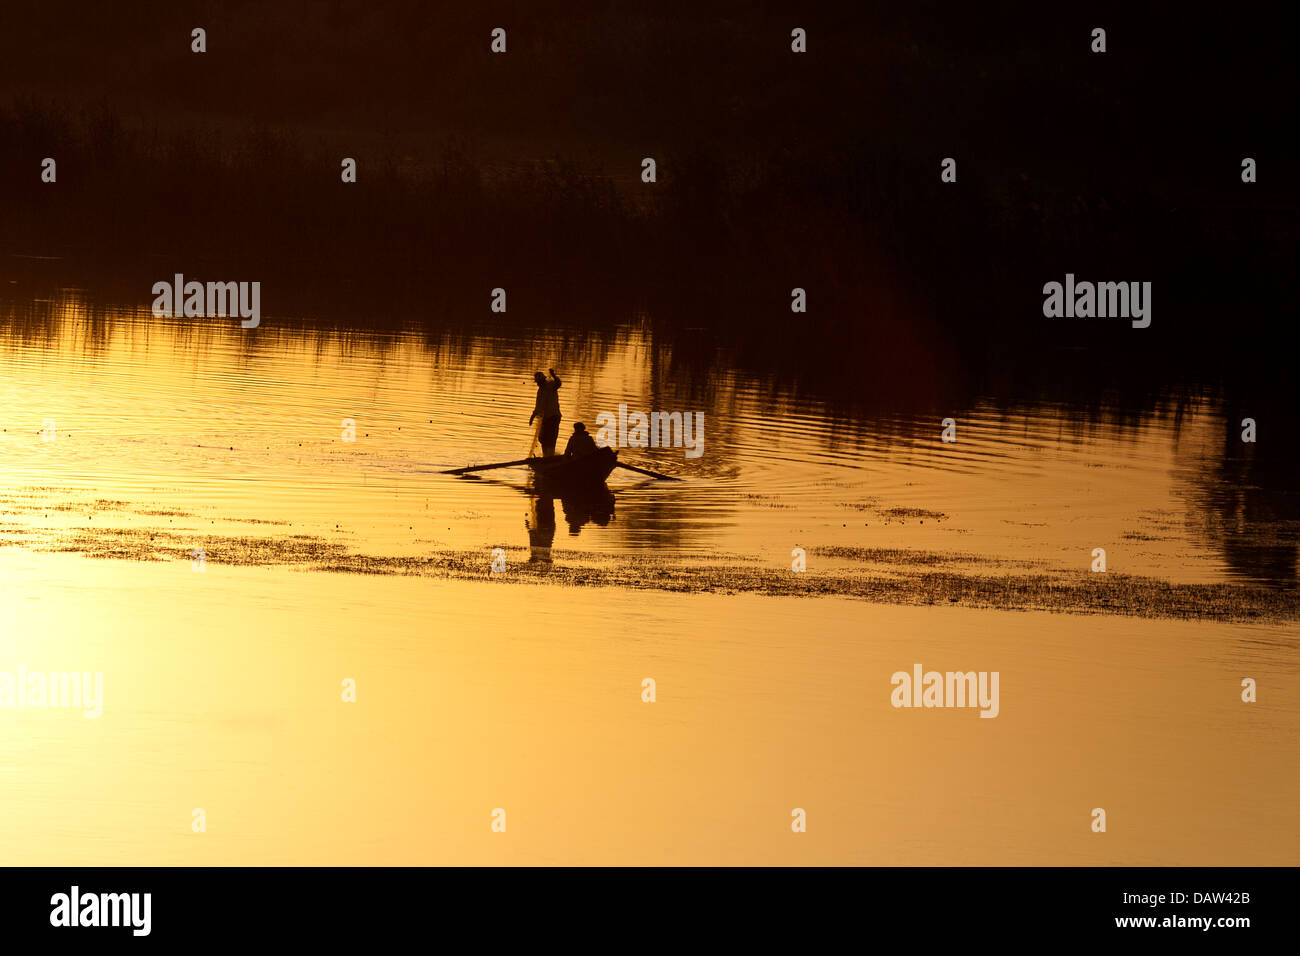 Two Nile fishermen silhouetted against golden reflection at sunset on the river Nile Egypt Africa Stock Photo